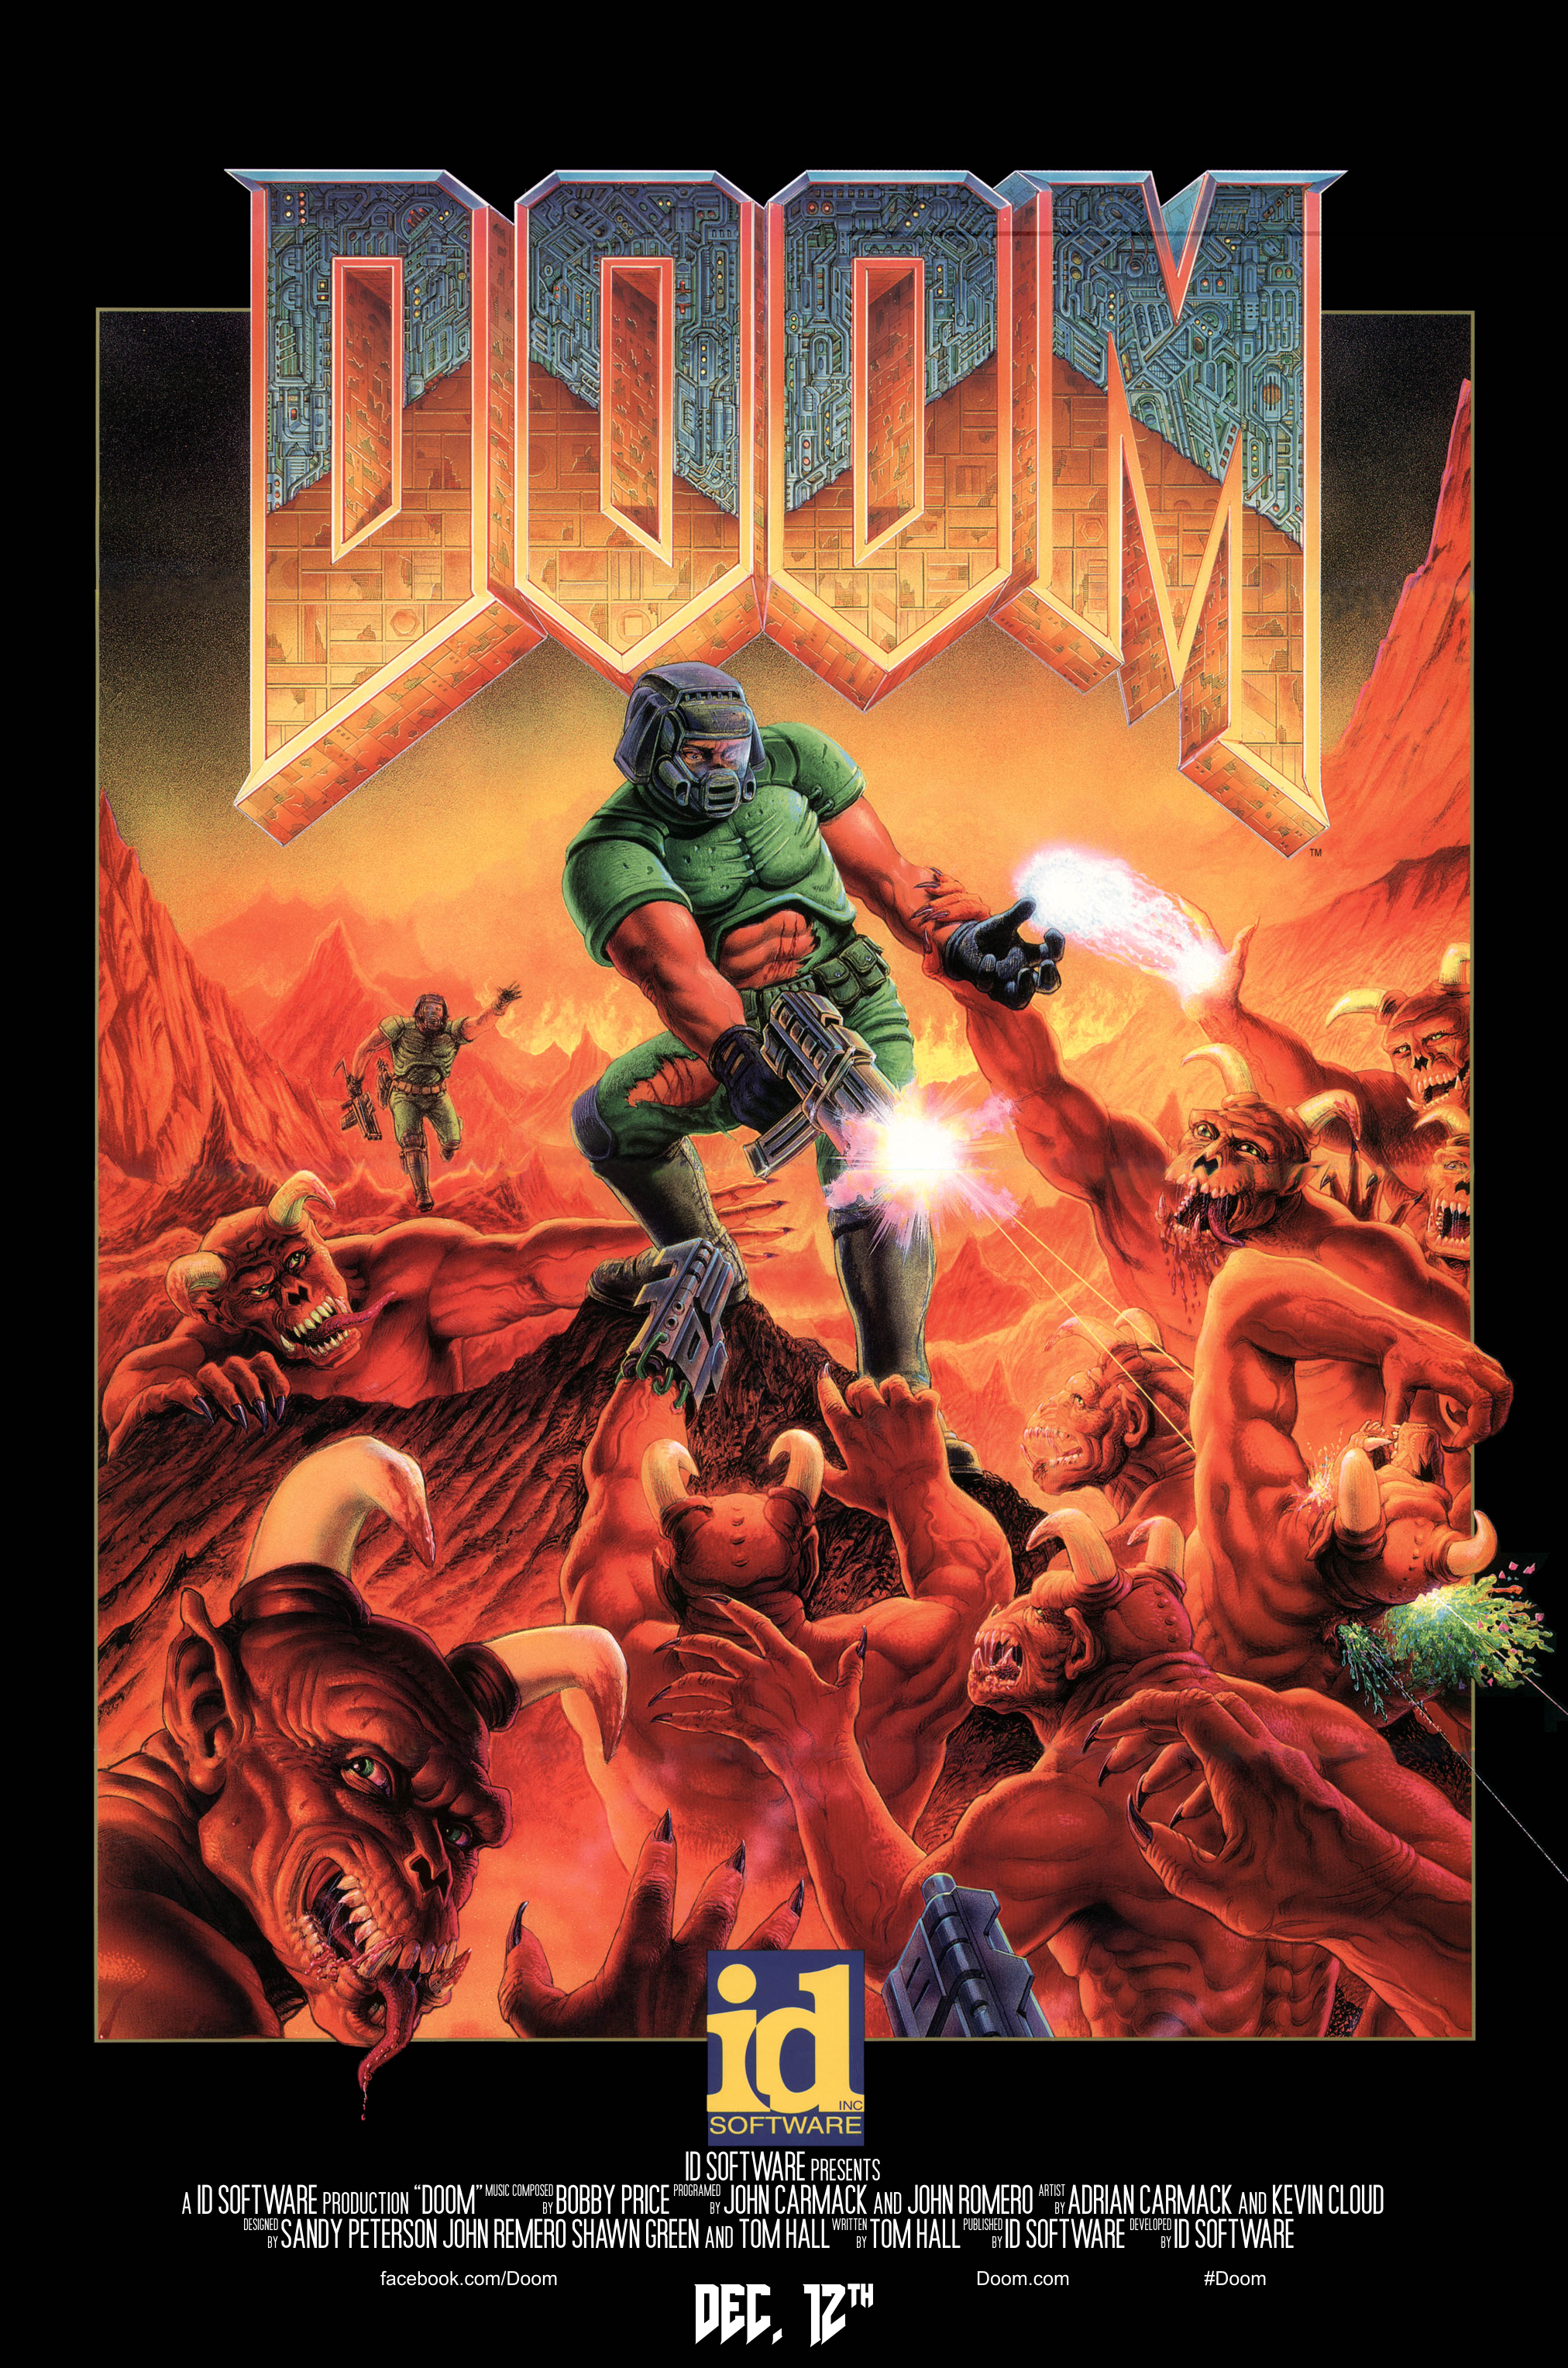 Doom movie poster version by imperial on